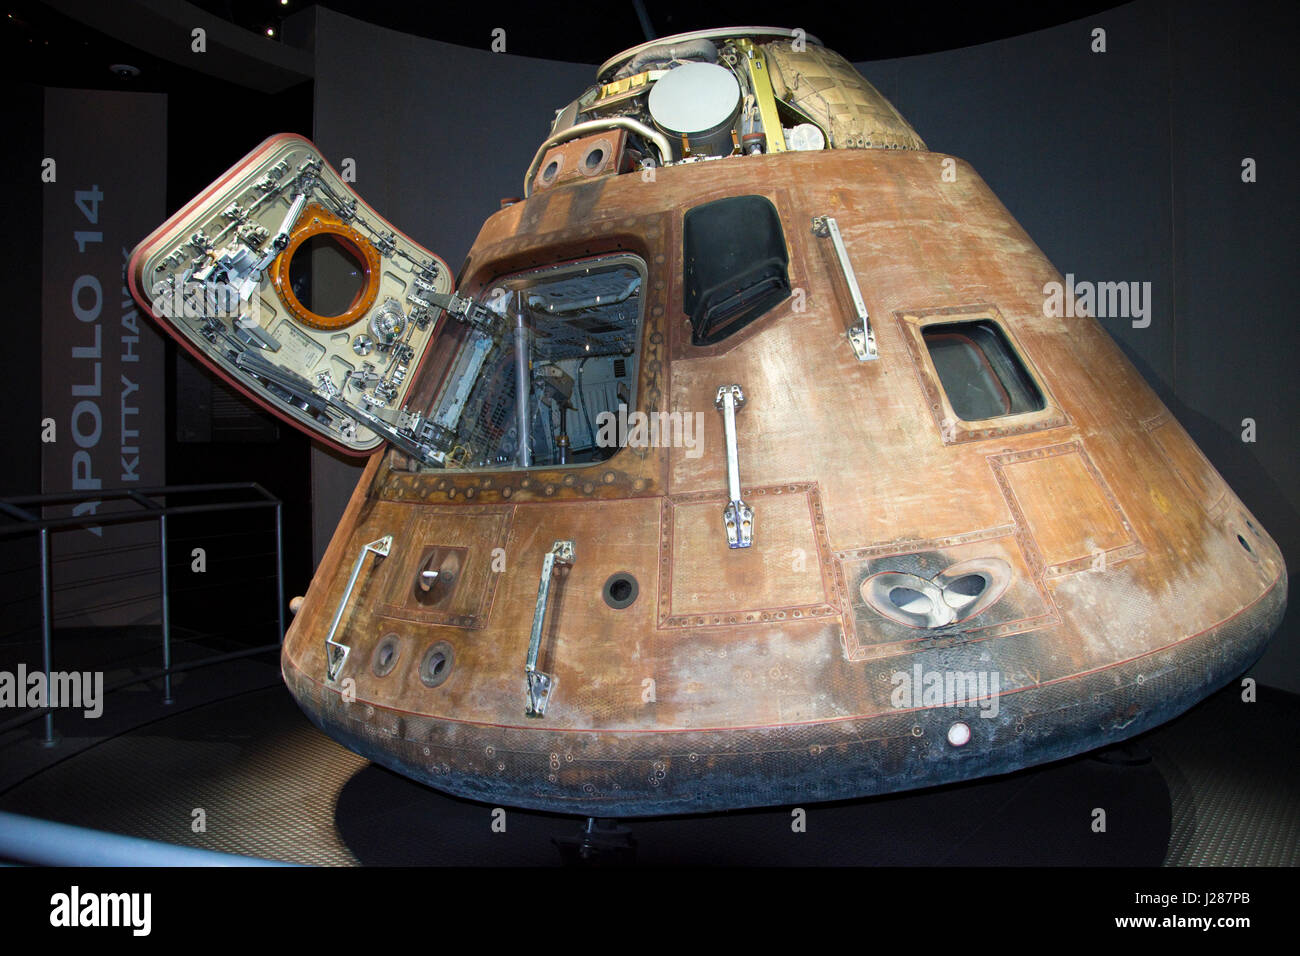 The Apollo 14 command module spacecraft, flown to the moon in 1971, displayed at the Visitor Complex at NASA's Kennedy Space Center, Florida. Stock Photo